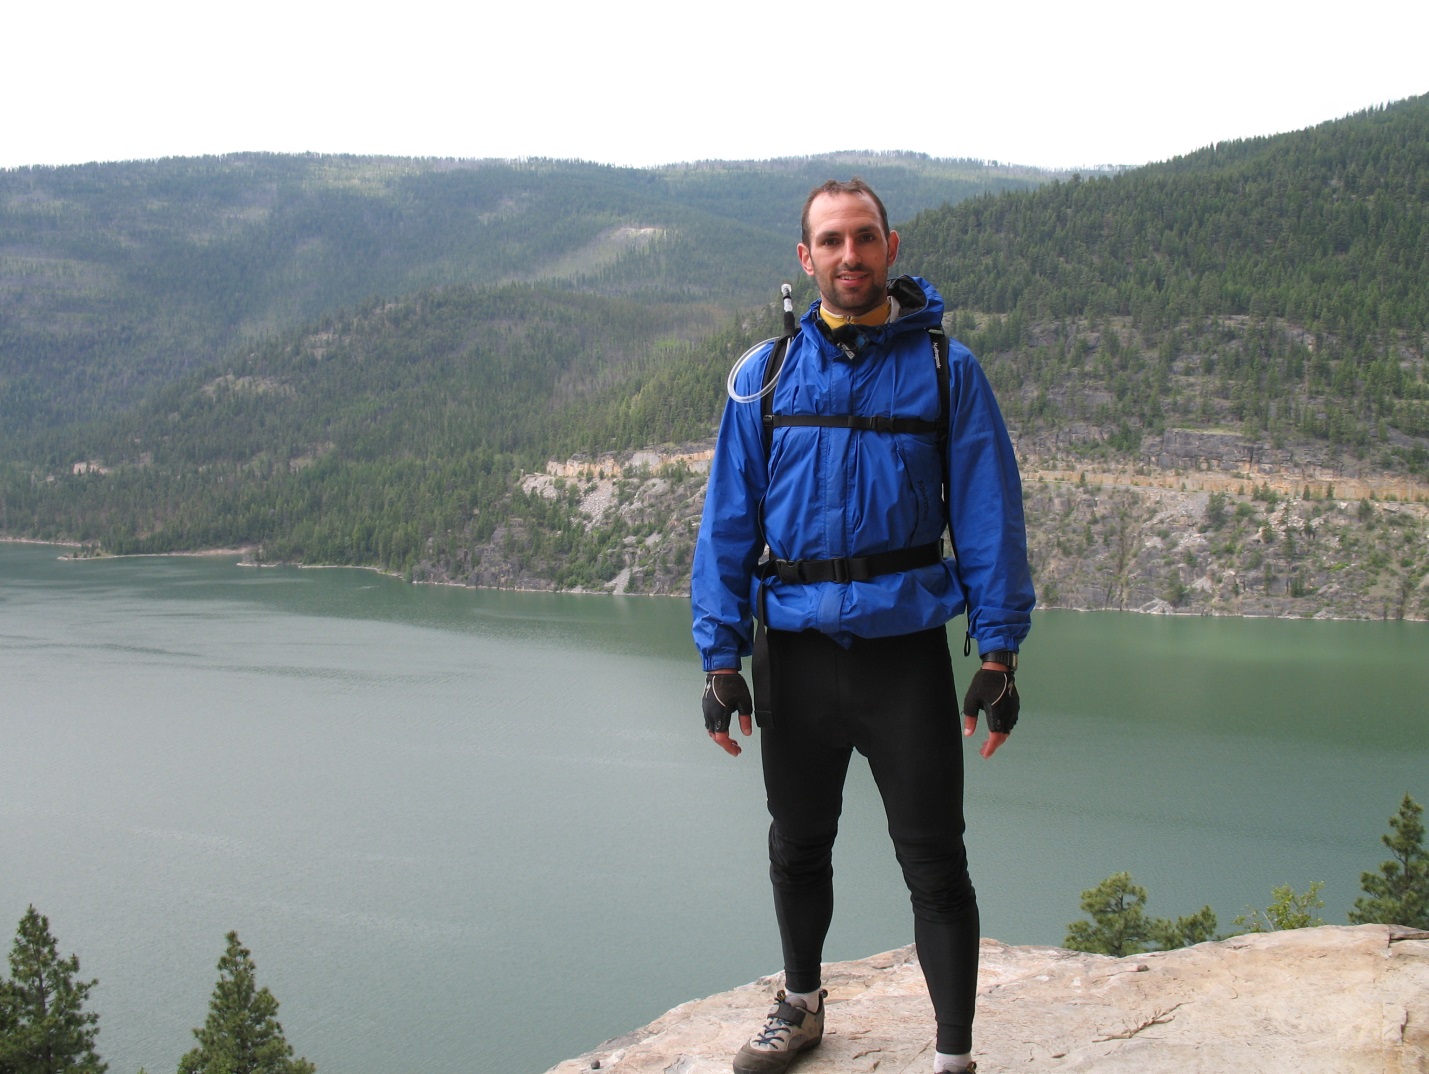 Standing over Lake Koocanua in Montana a few minutes before my accident, 2006